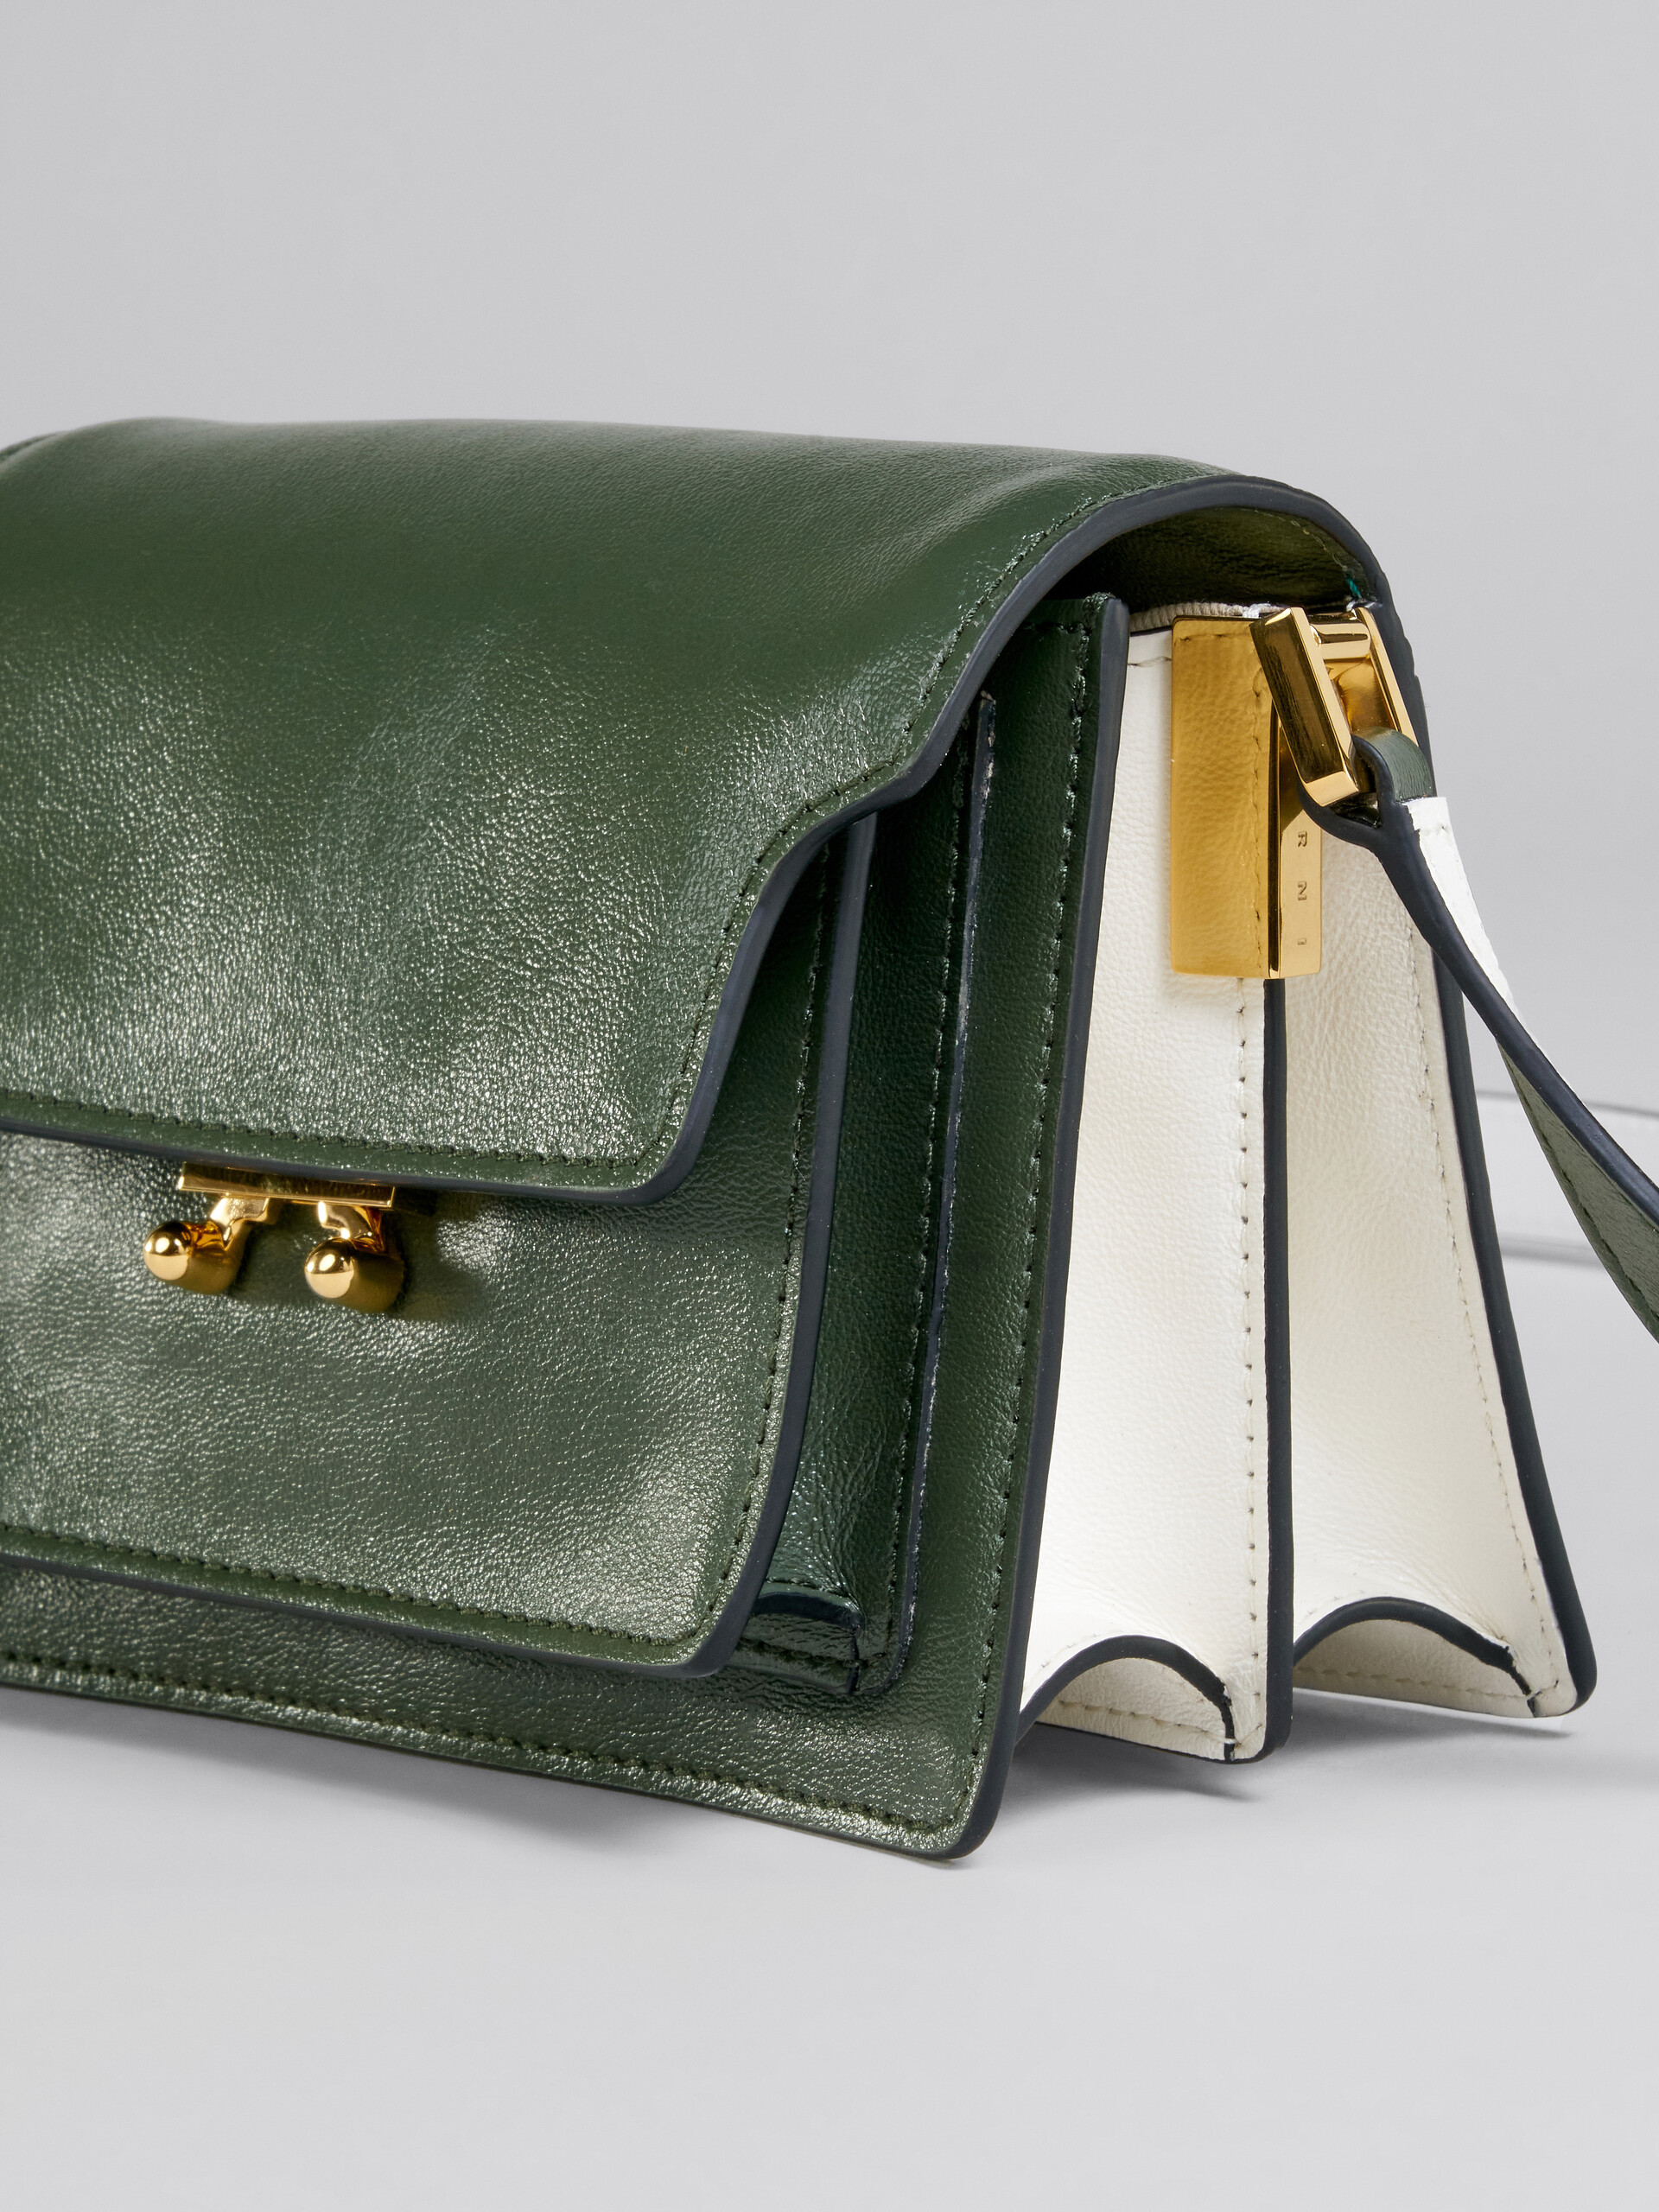 Trunk Soft Mini Bag in green and white leather - Shoulder Bags - Image 5